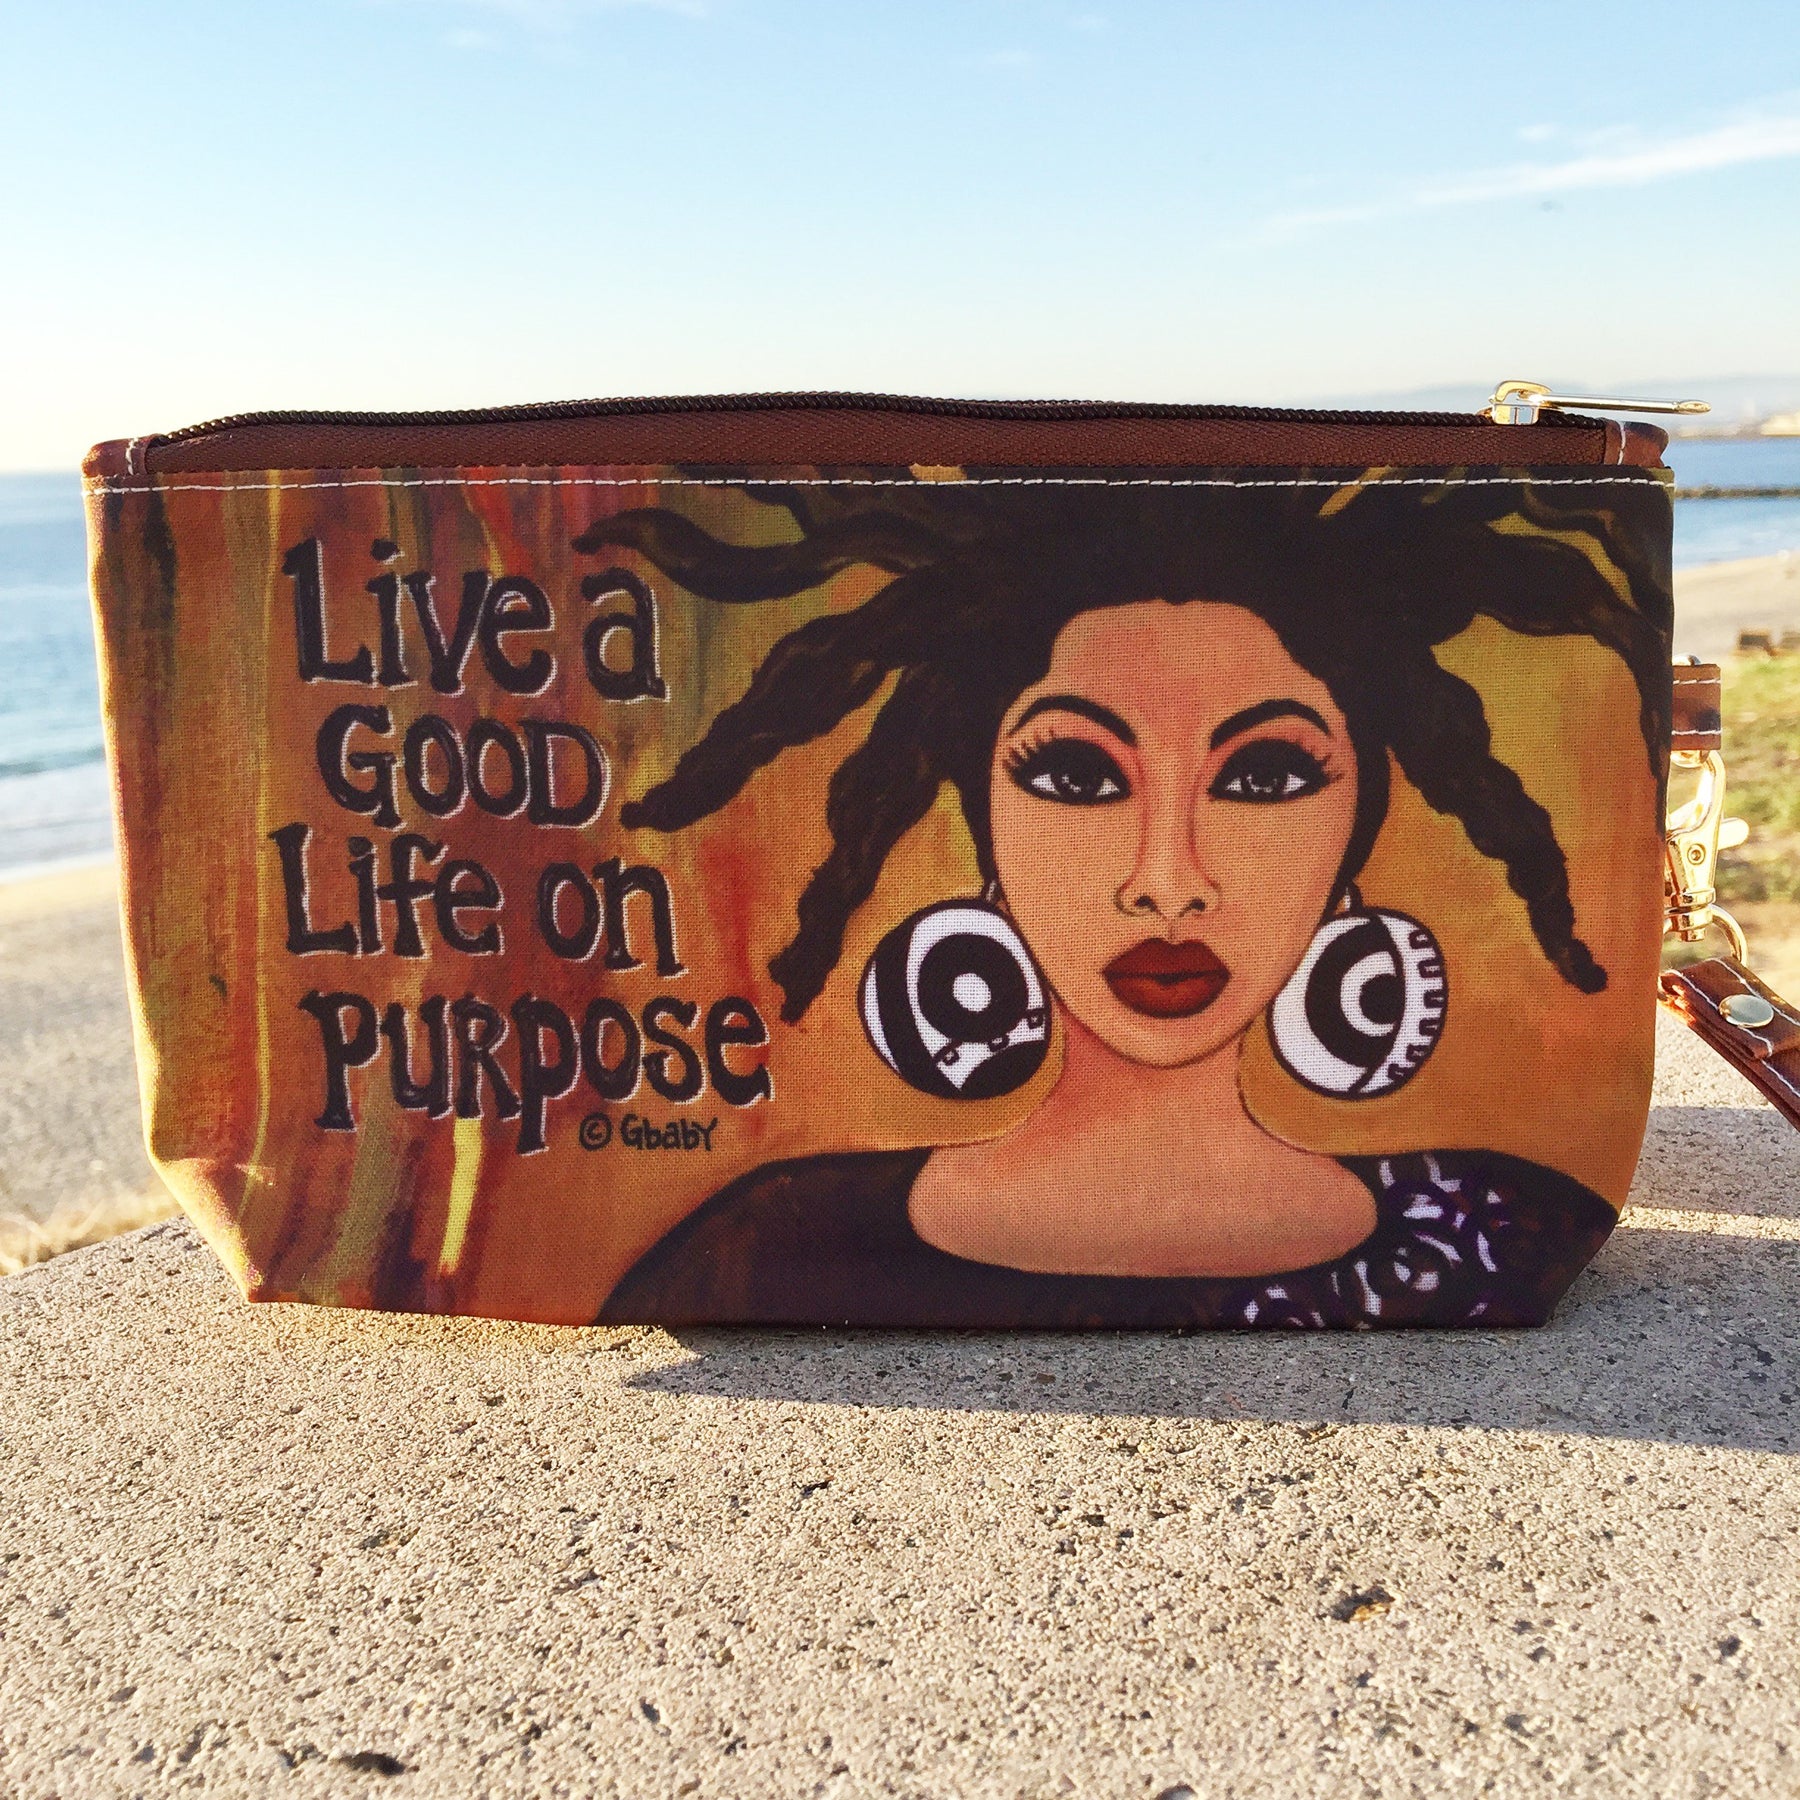 2 of 2: Life on Purpose: African American Cosmetic Bag by Sylvia 